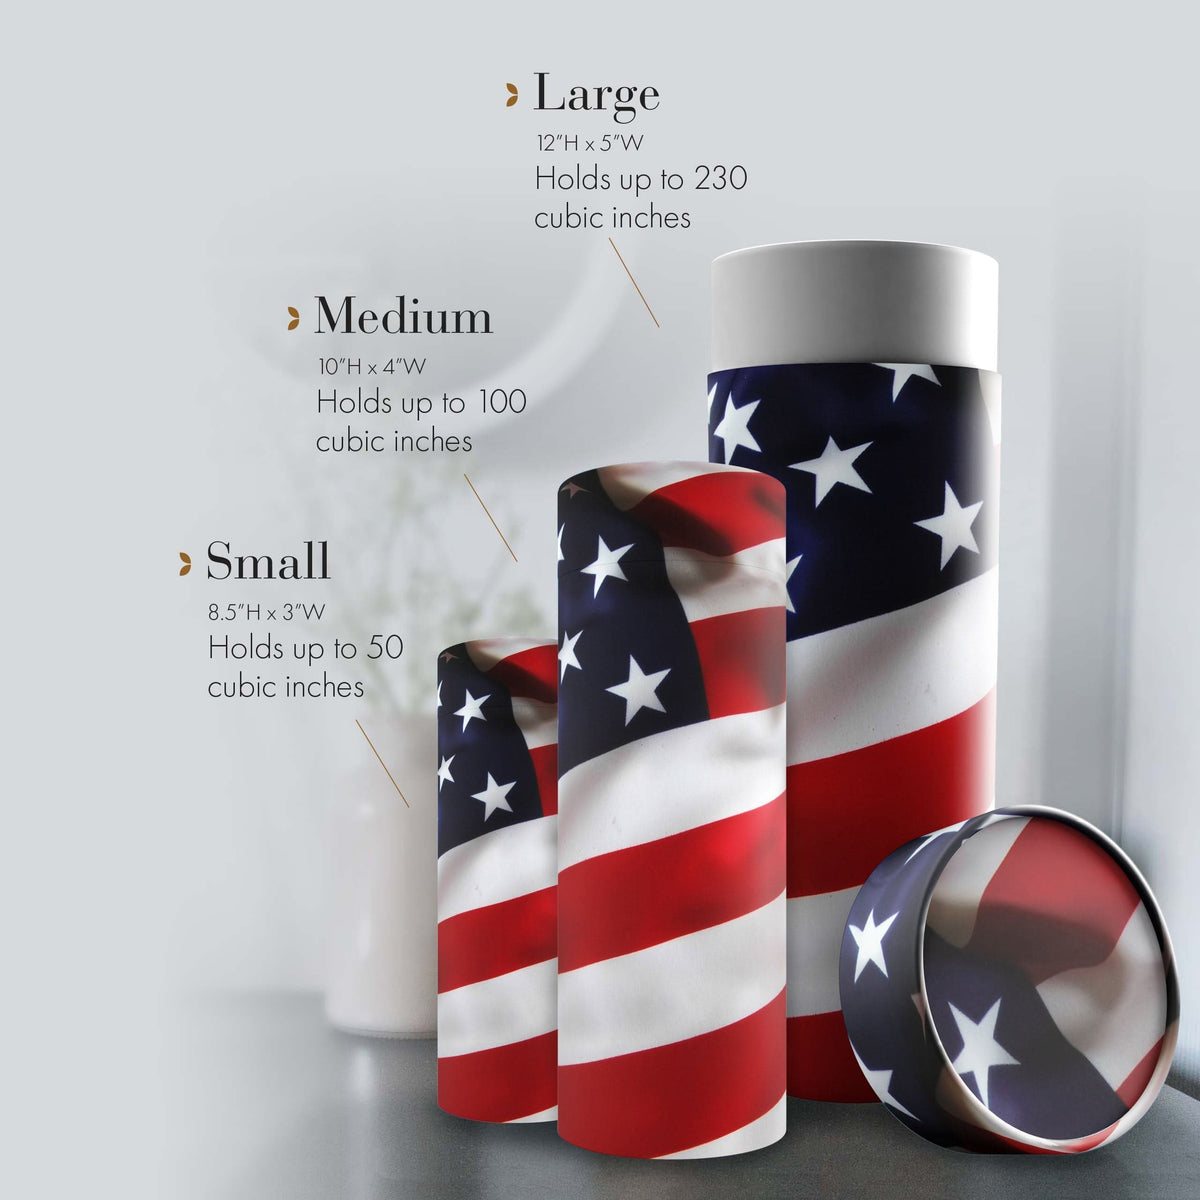 Commemorative Cremation Urns American Flag - Biodegradable &amp; Eco Friendly Burial or Scattering Urn / Tube